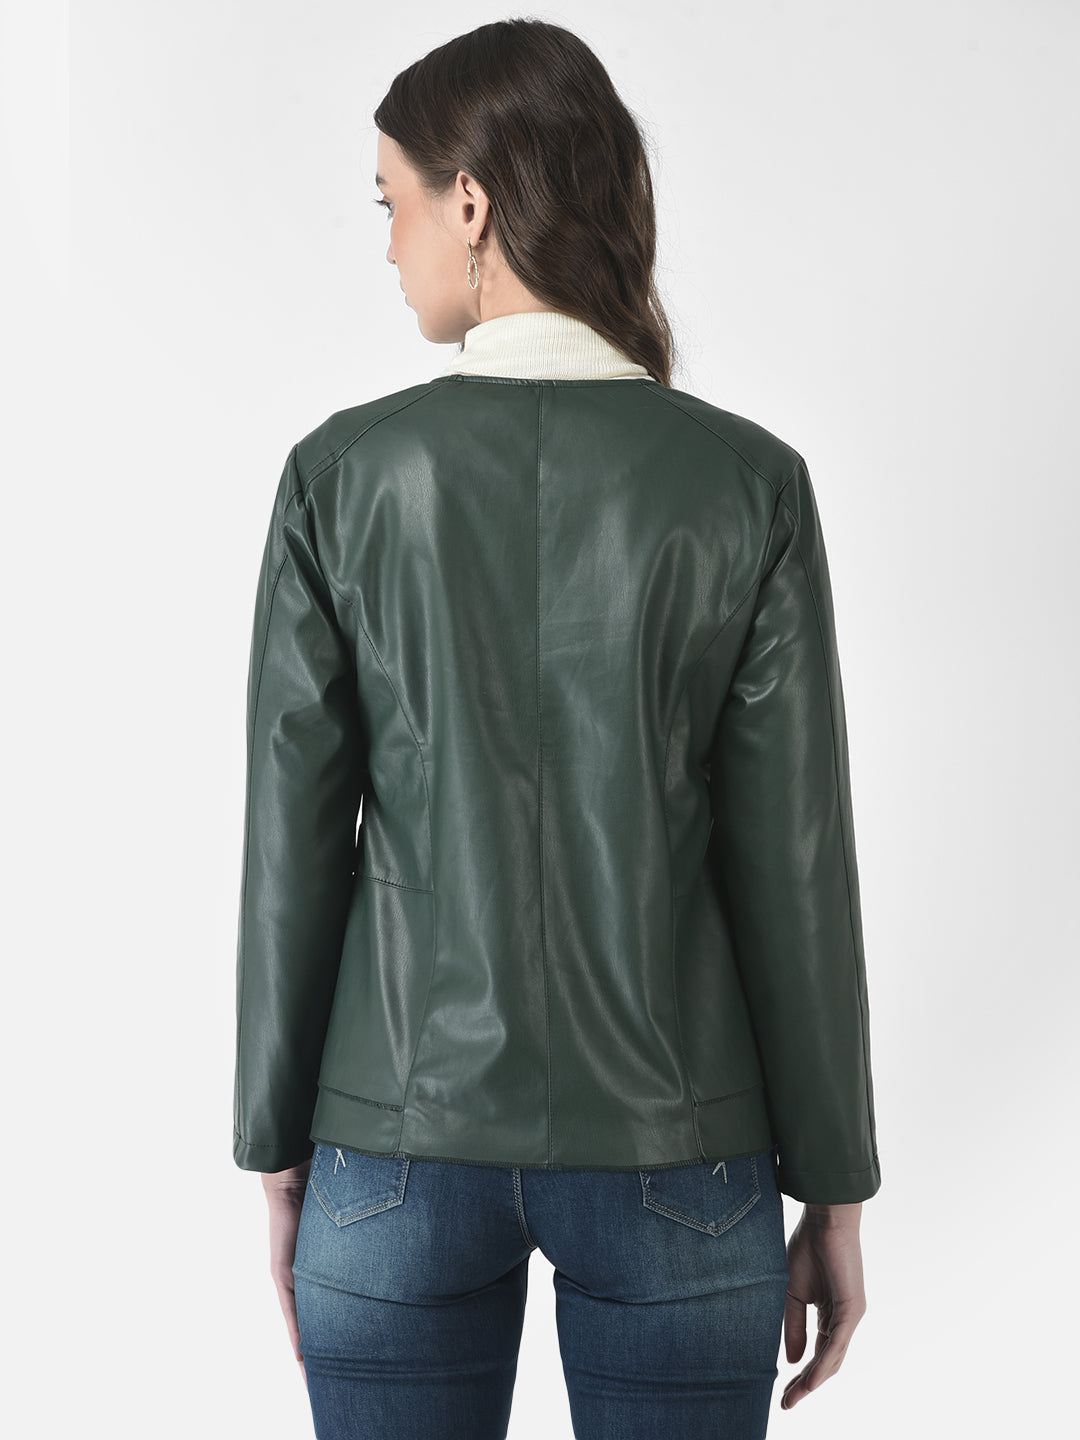  Green Faux Leather Jacket